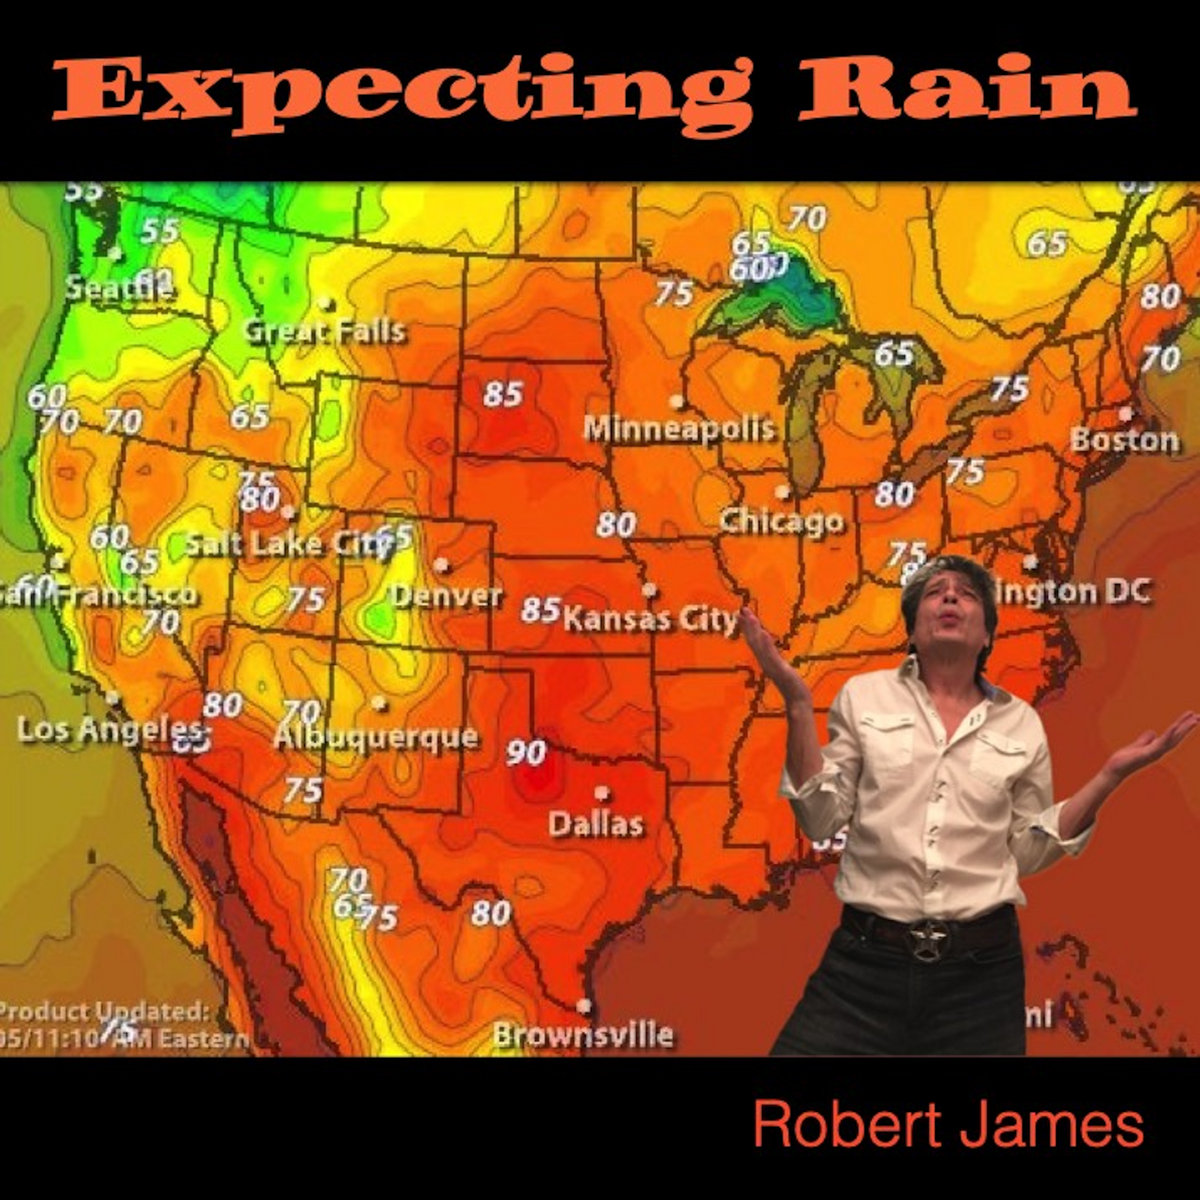 Picture of Robert James in front of a weather map